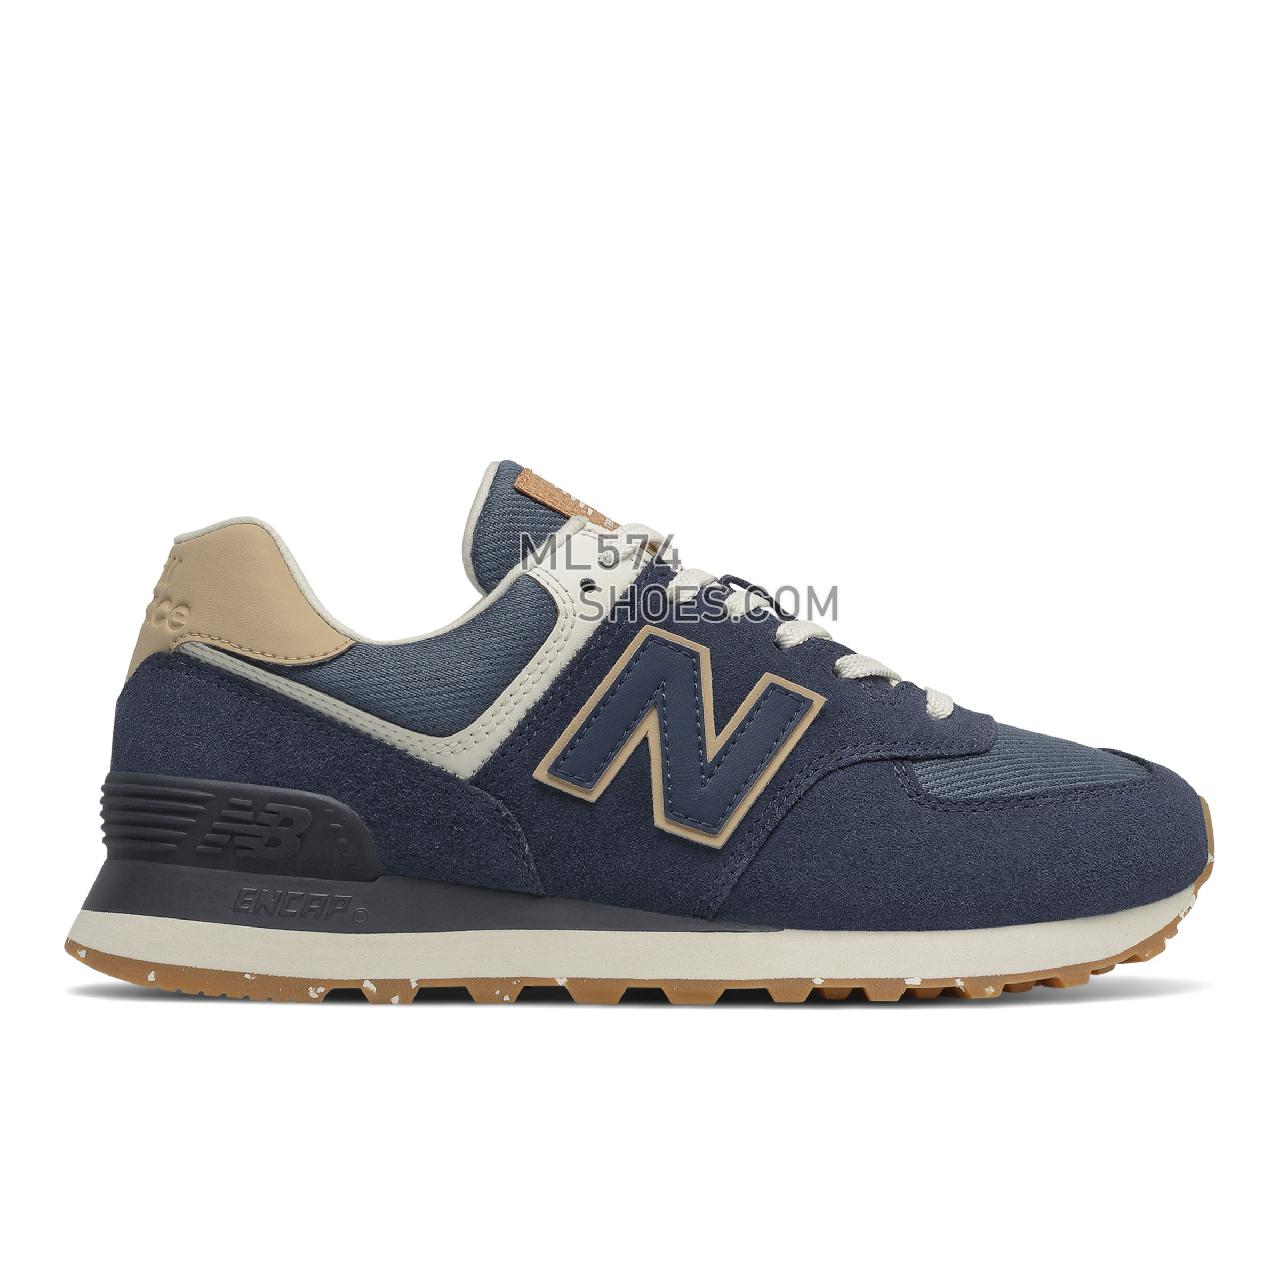 New Balance 574 - Women's Classic Sneakers - Navy with Incense - WL574SO2